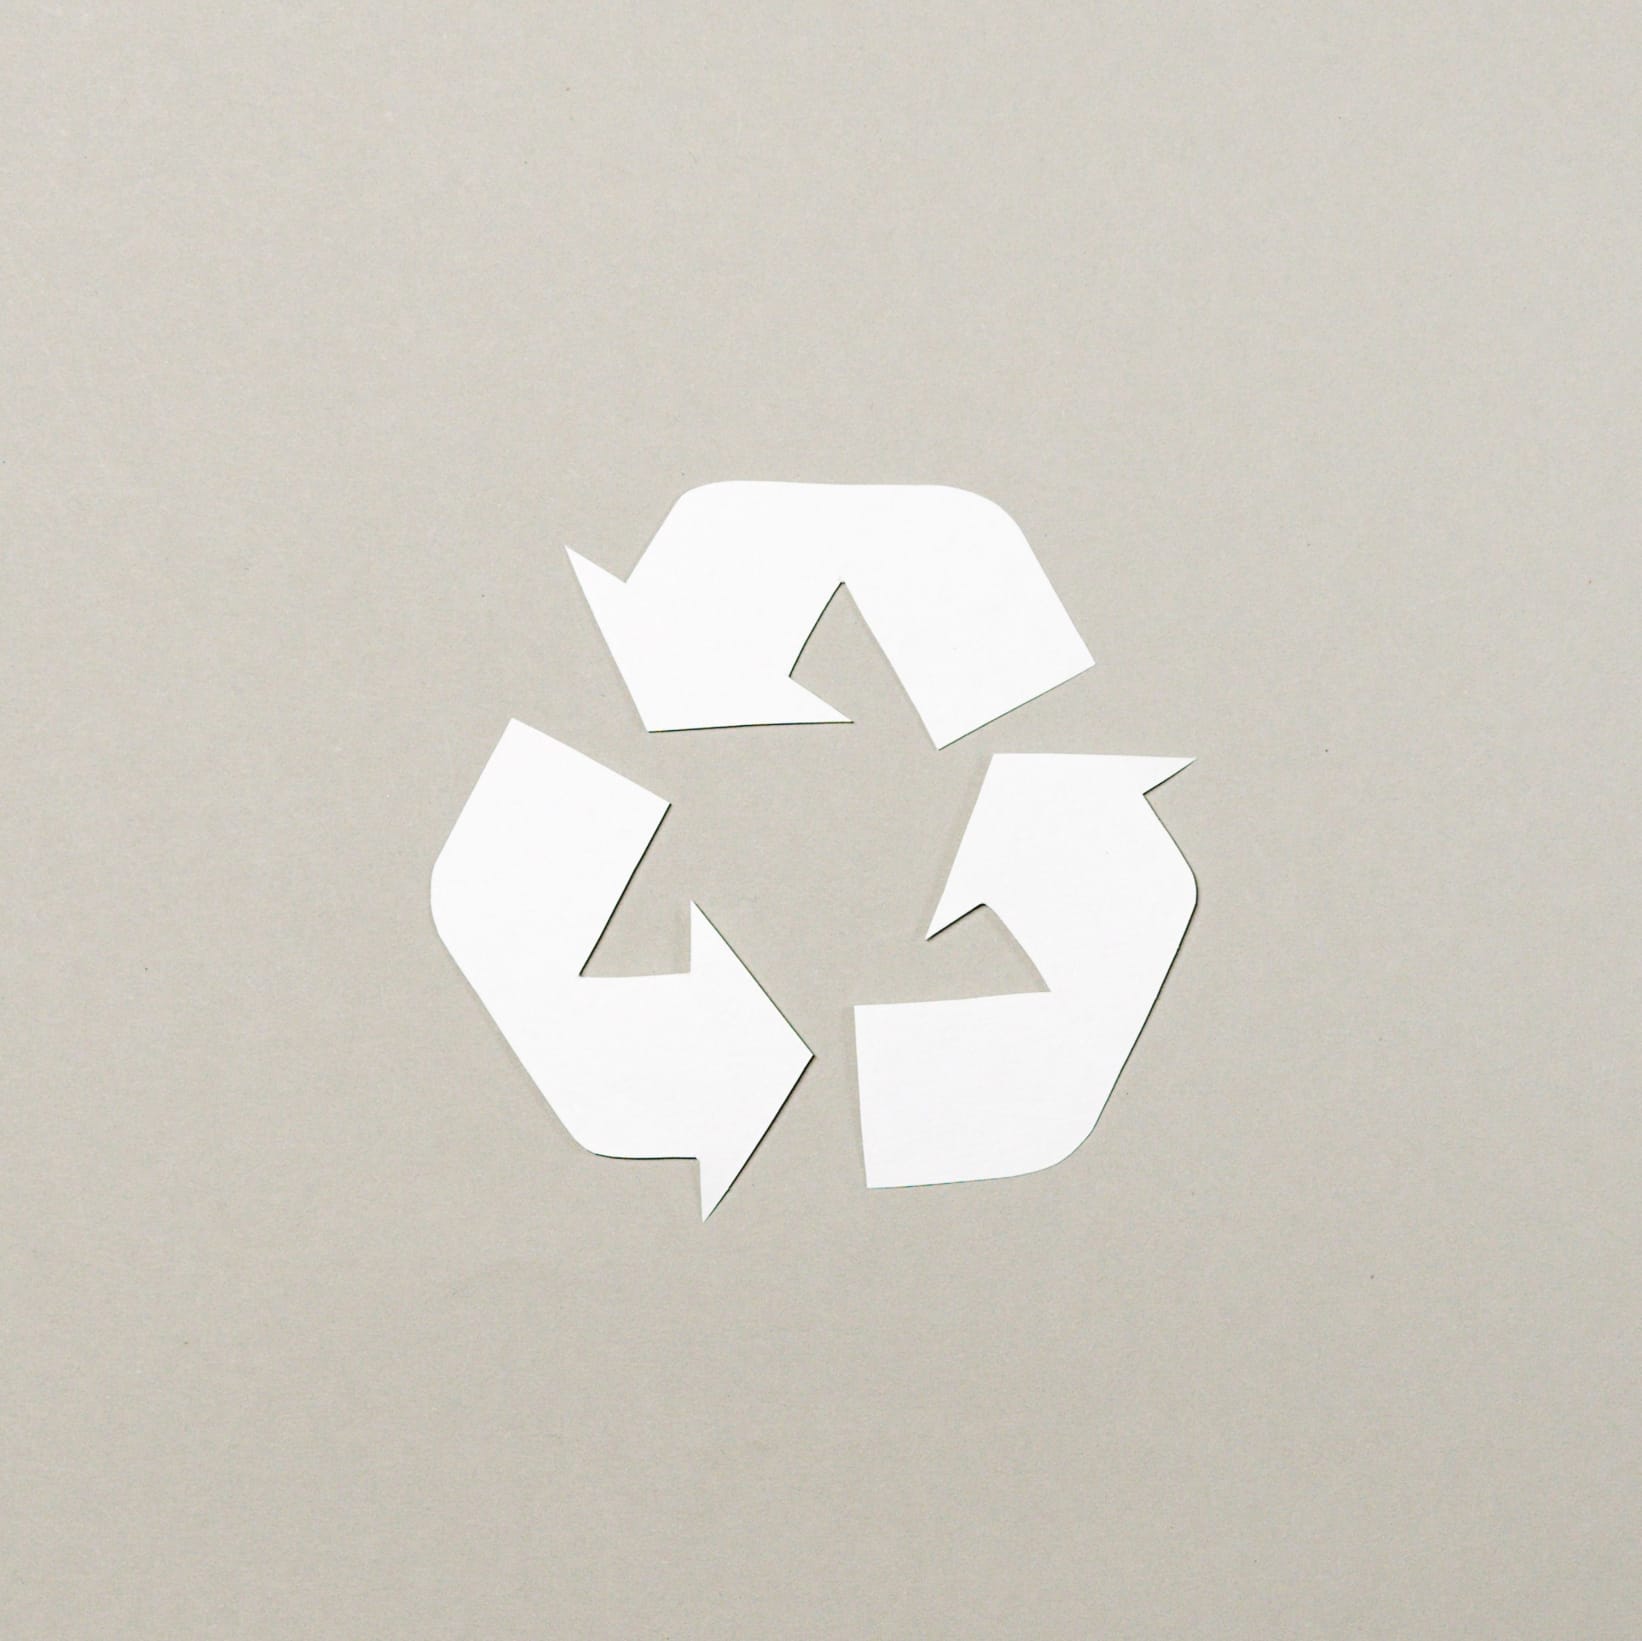 Recycling logo with three arrows adjoined in a triangle